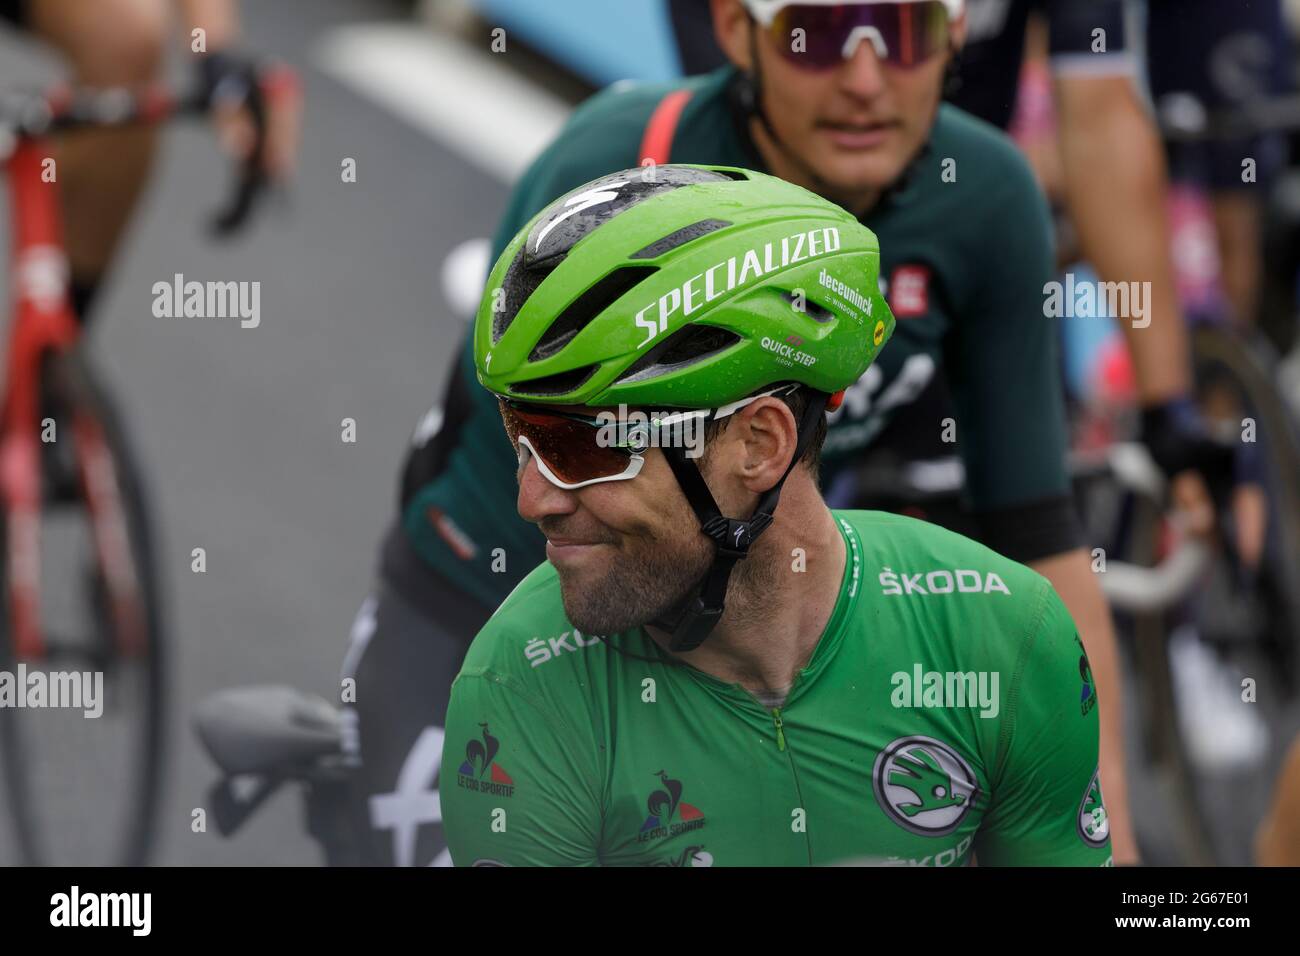 Le Grand-Bornand, France. 03 July 2021. Mark Cavendish at the finish of the 8th stage of the Tour de France in Le Grand-Bornand. Julian Elliott News Photography Credit: Julian Elliott/Alamy Live News Stock Photo